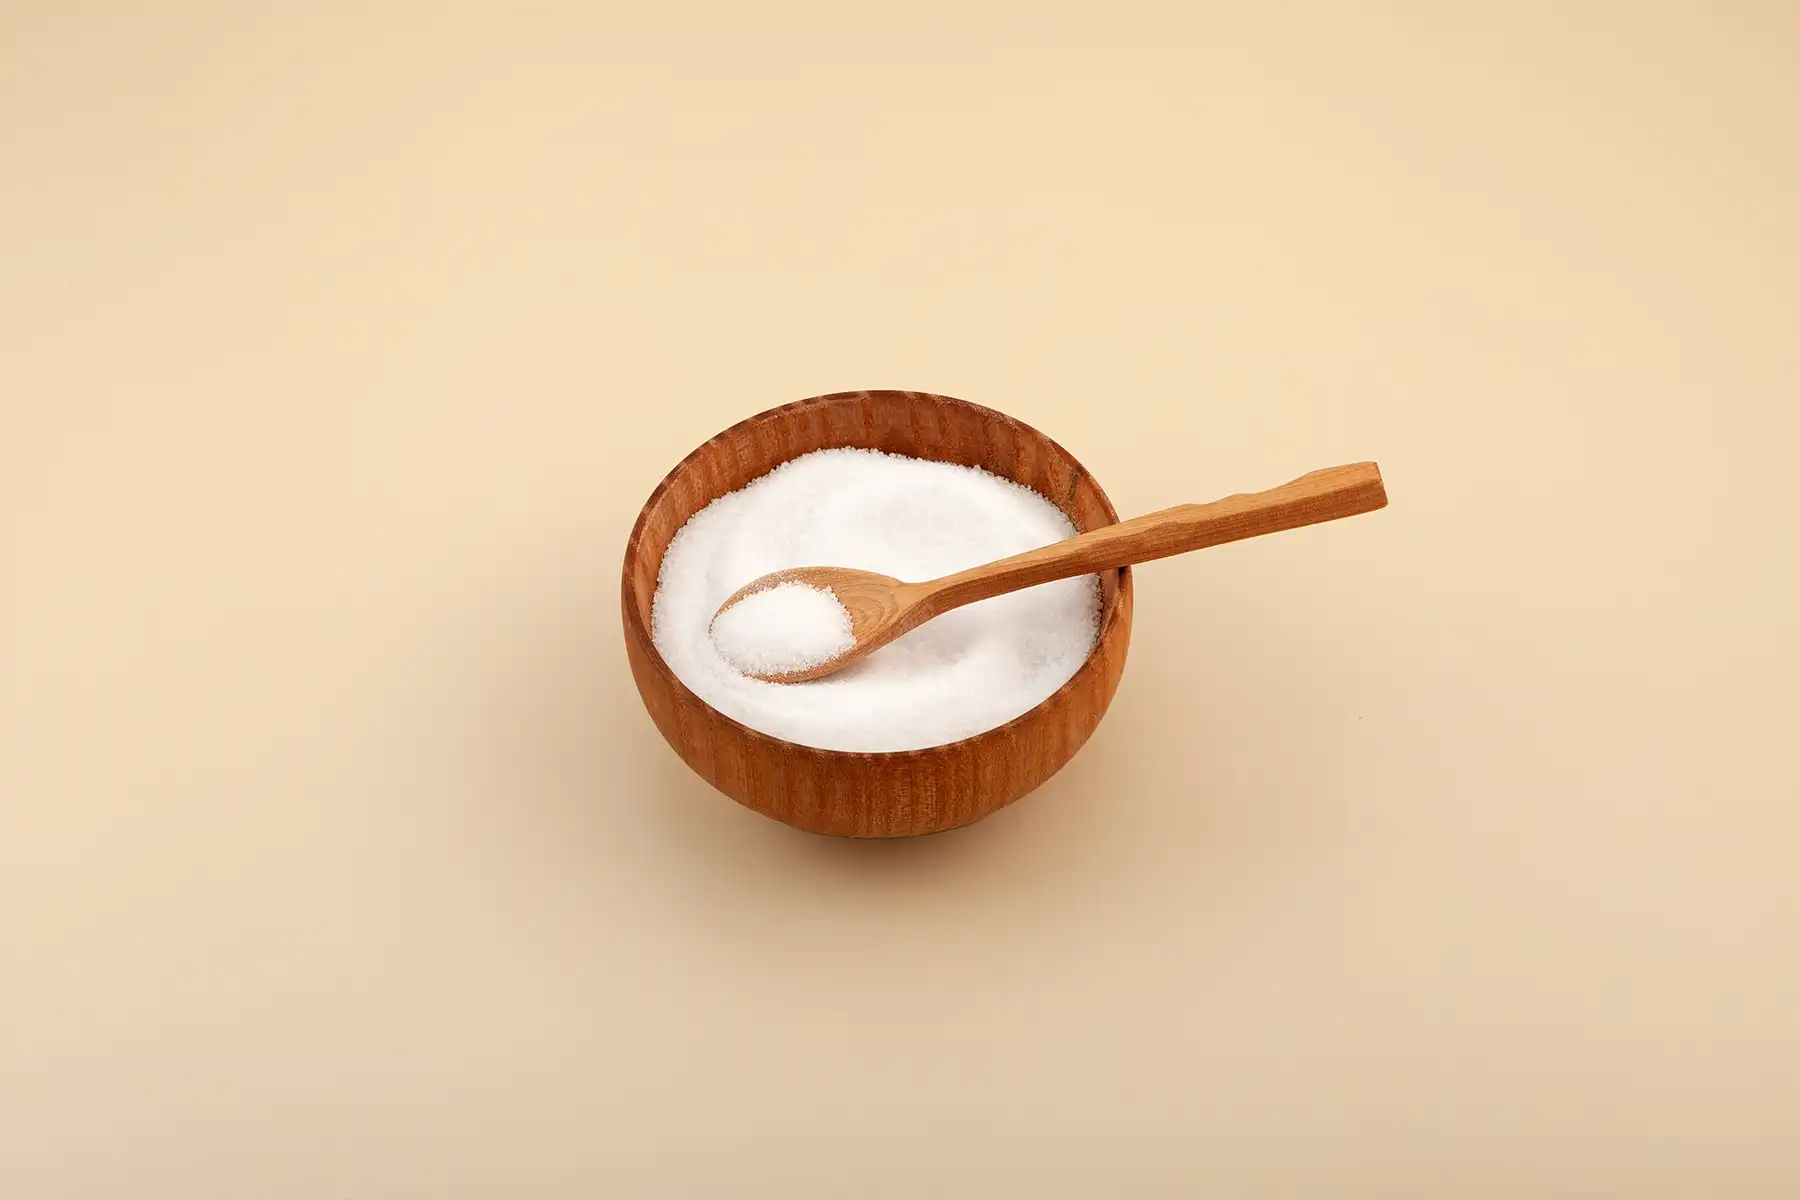 Wooden bowl of maltitol with a wooden spoon scooping some of it up.